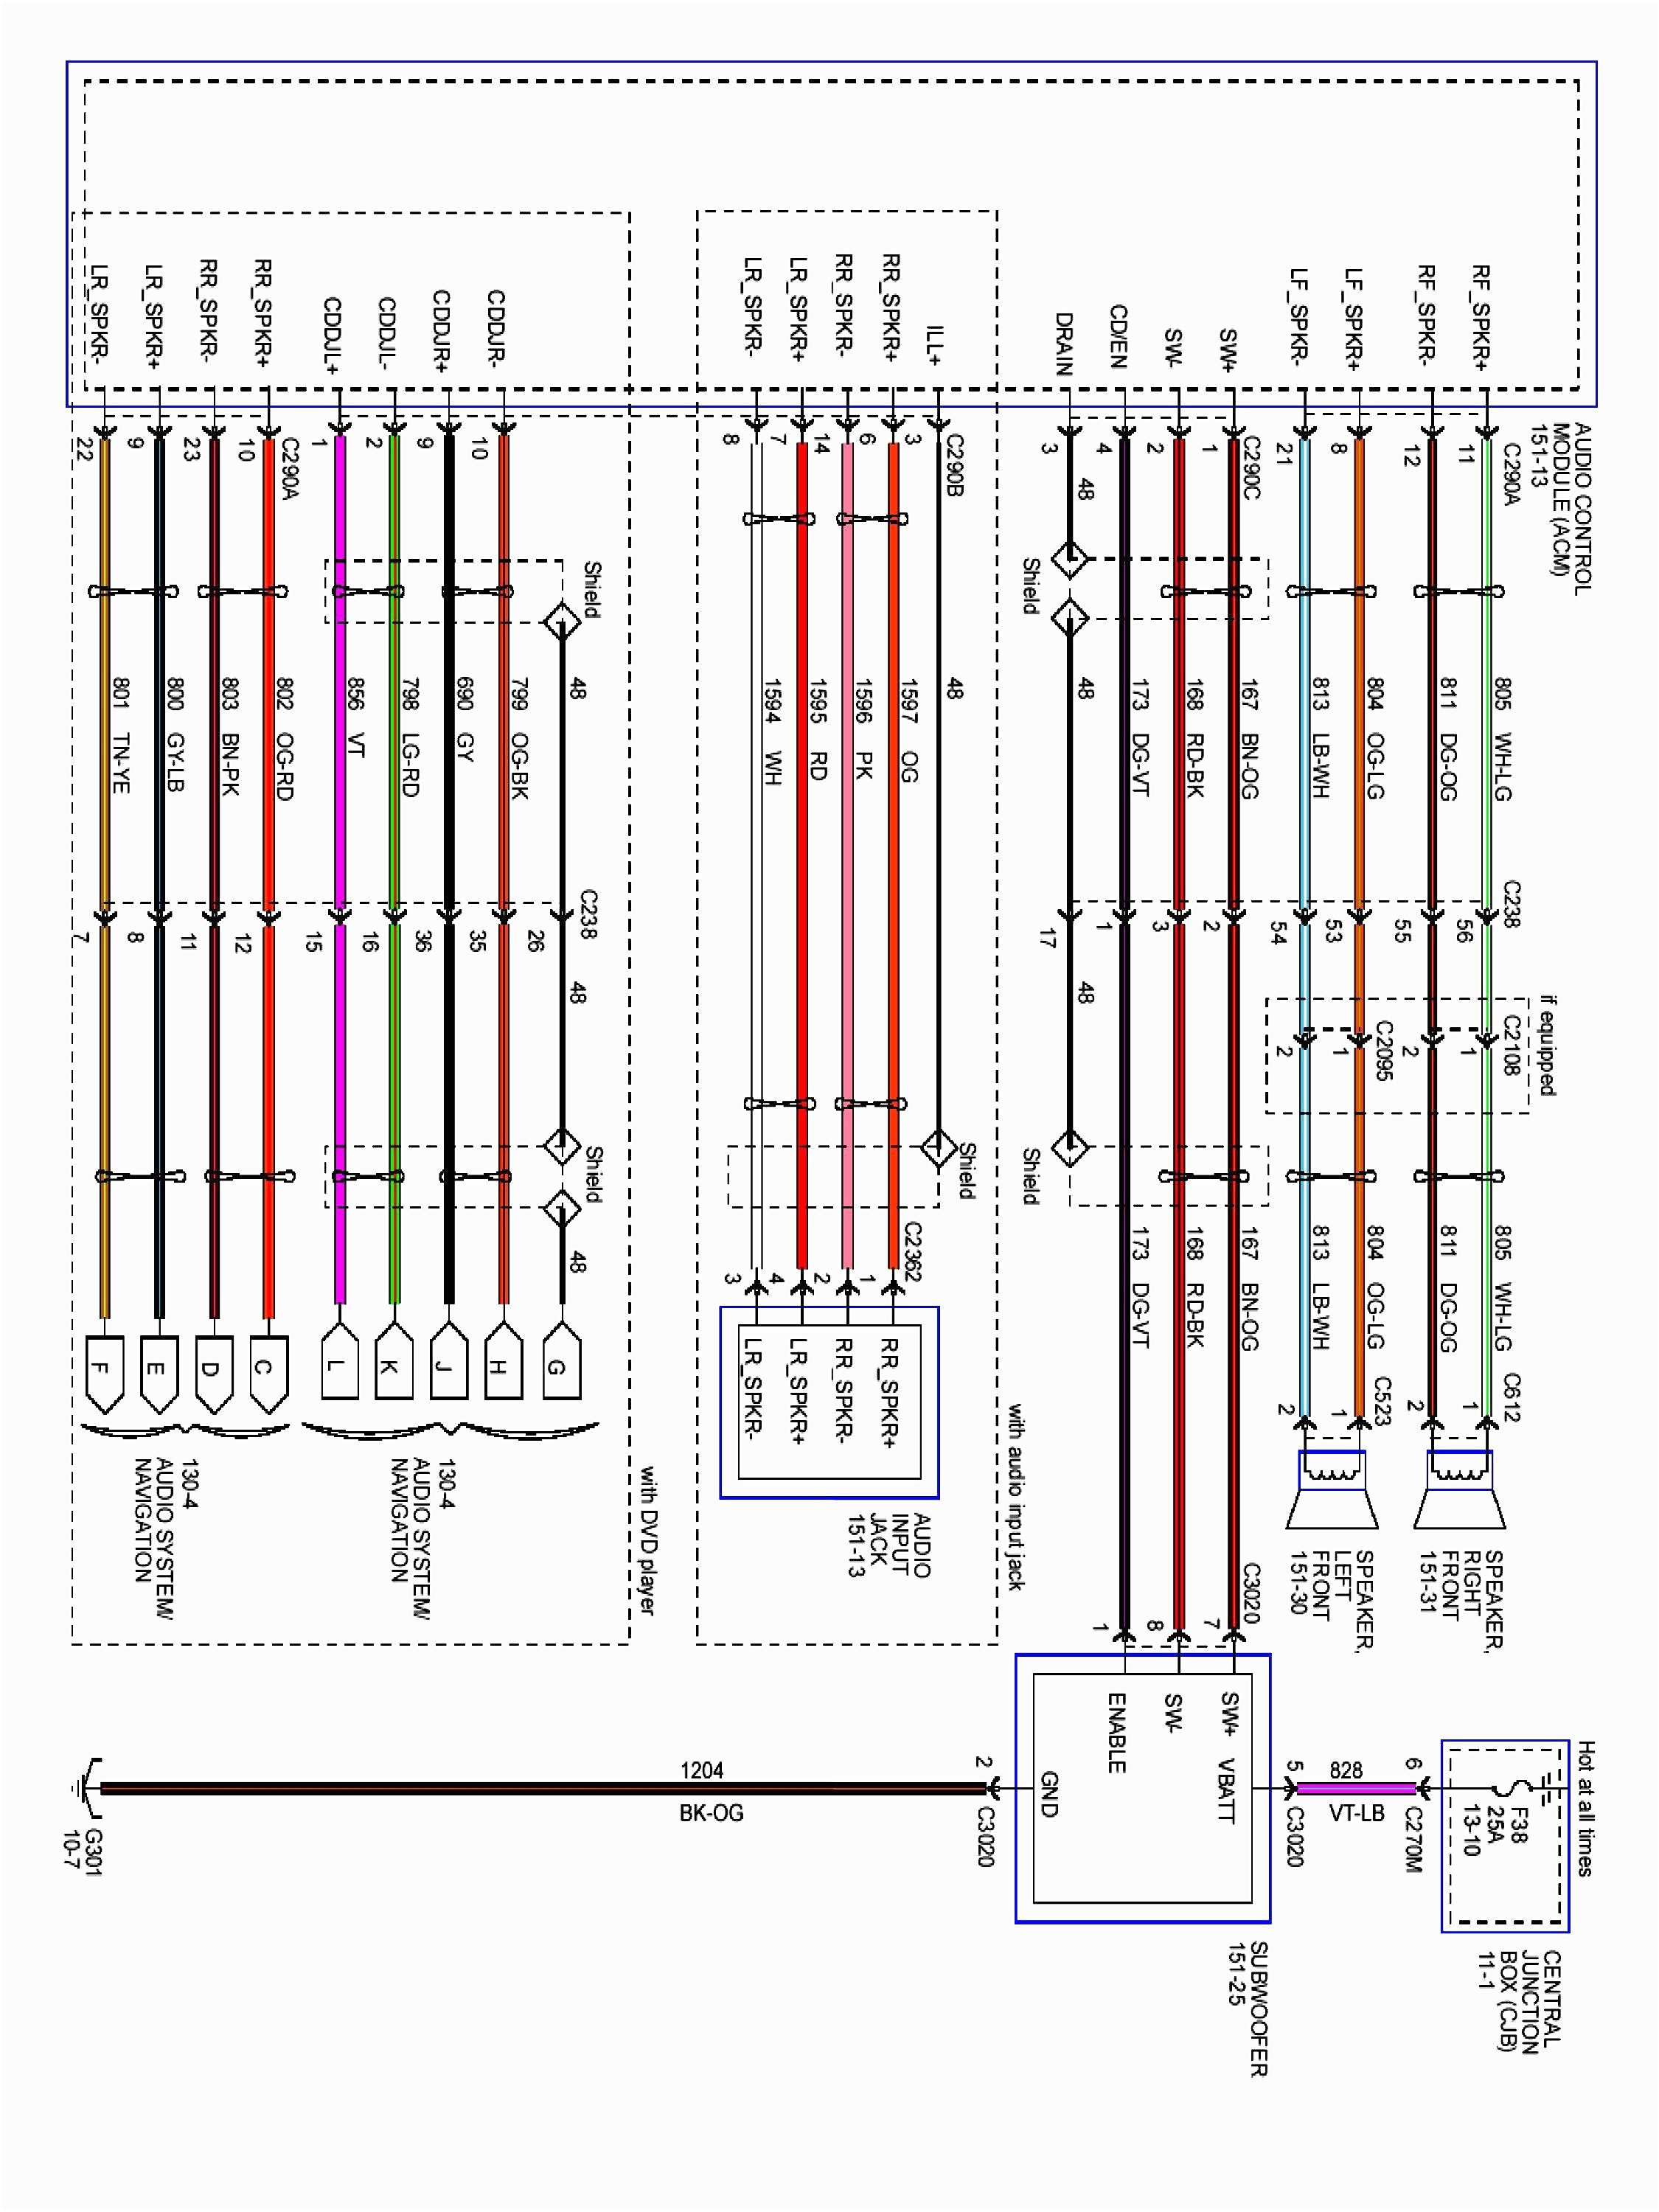 ford wiring harness diagrams wiring diagram operations 2011 ford f250 stereo wiring harness diagram ford f250 wiring harness diagram